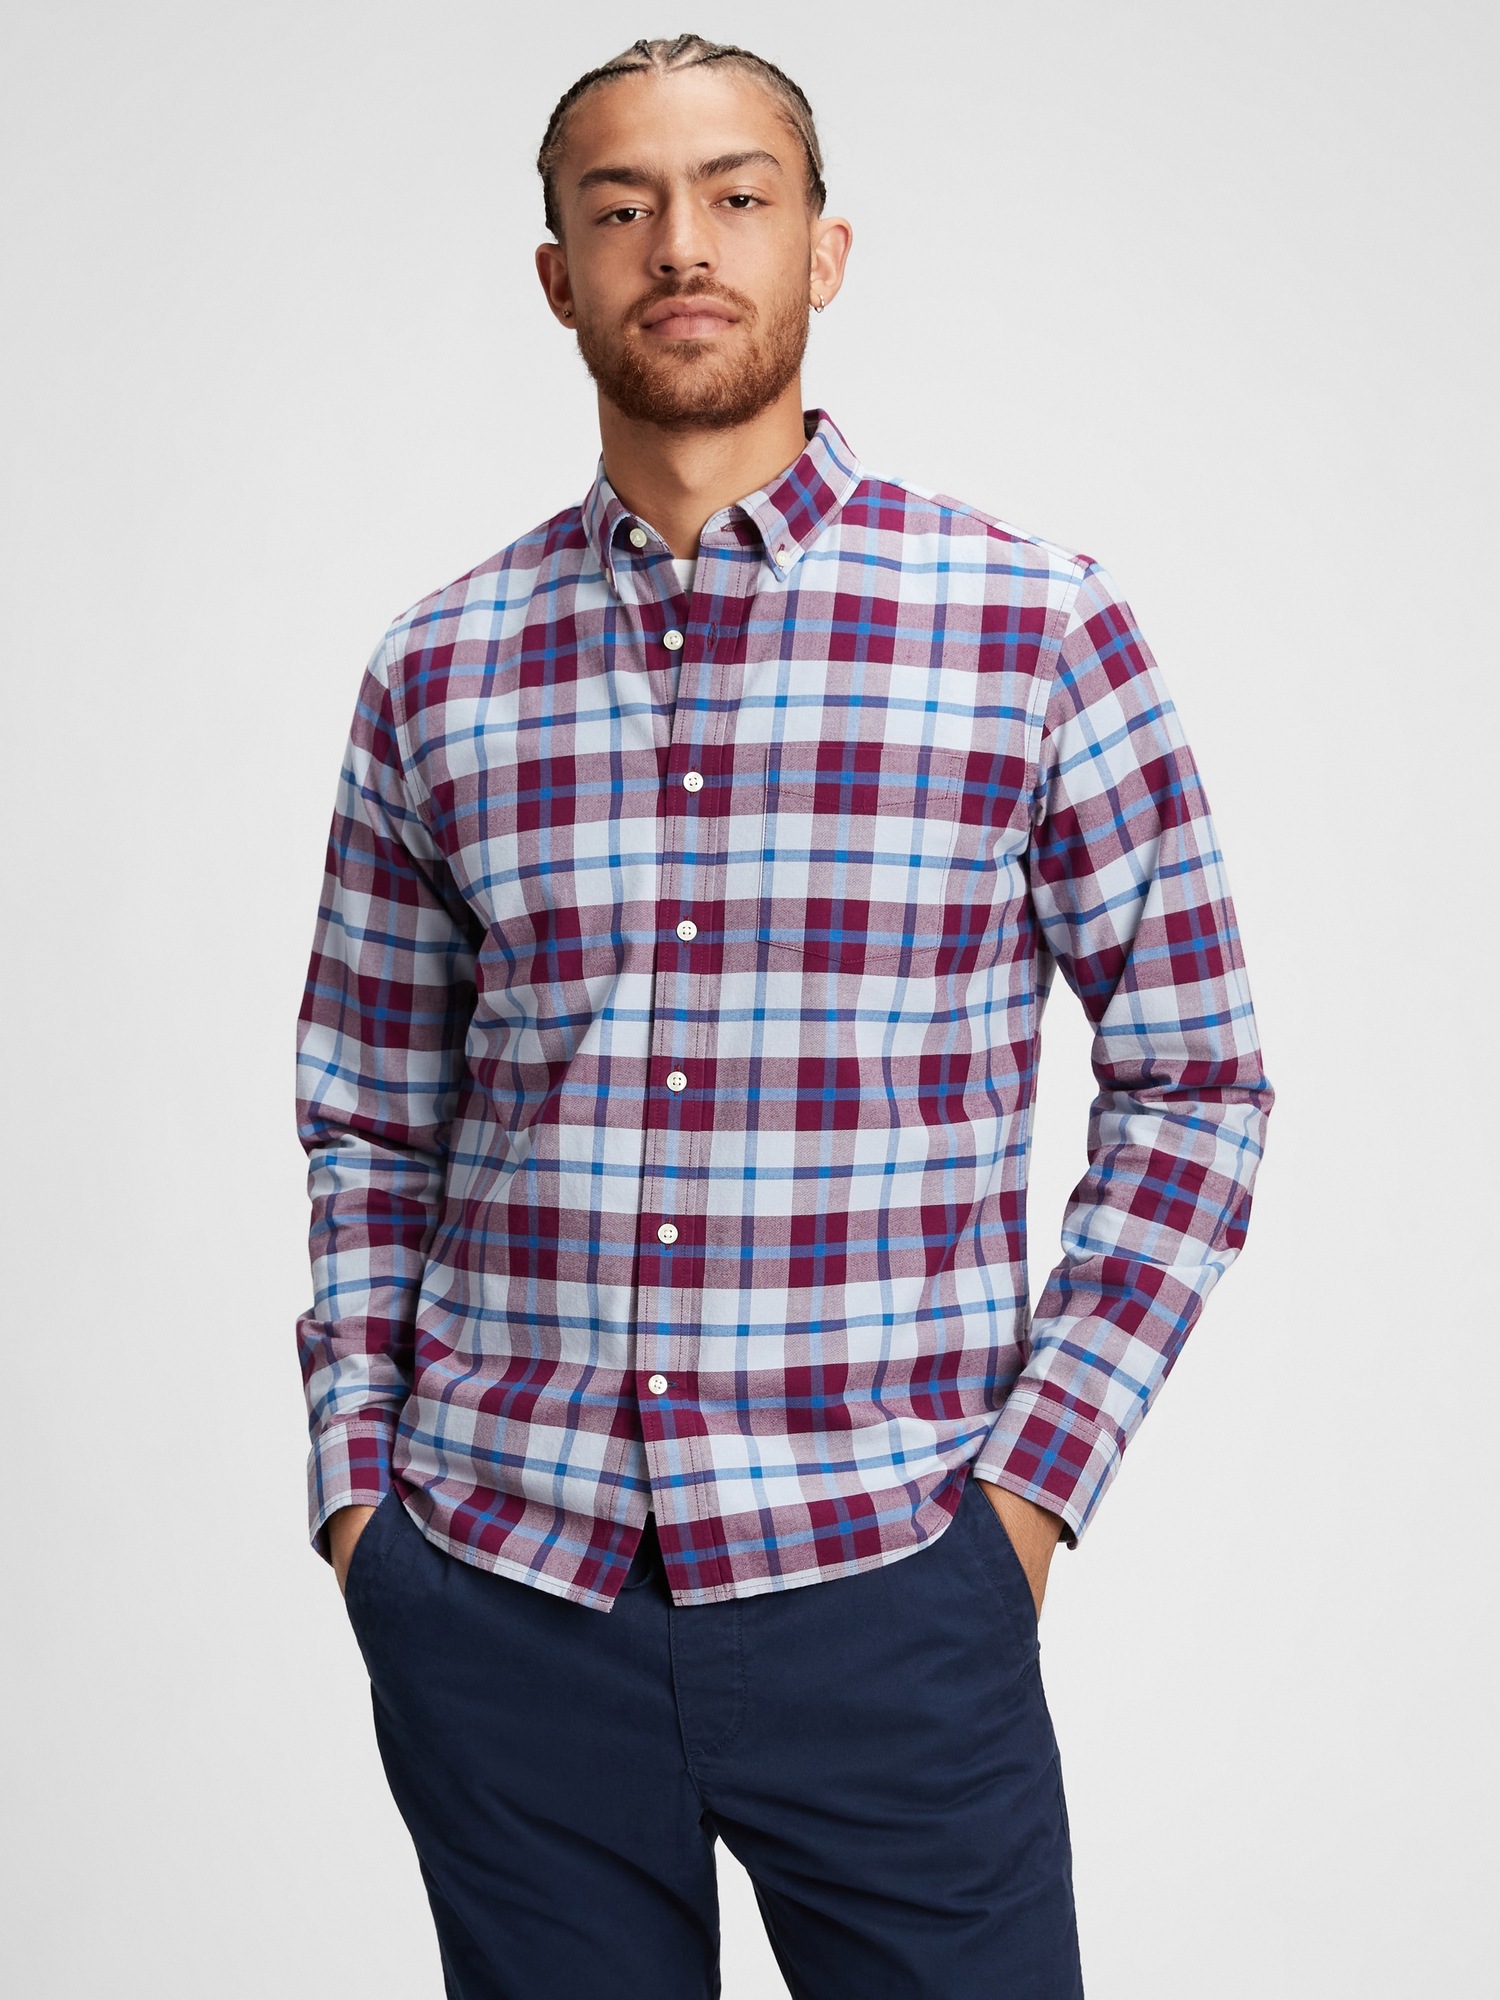 Oxford Shirt In Untucked Fit Gap Factory